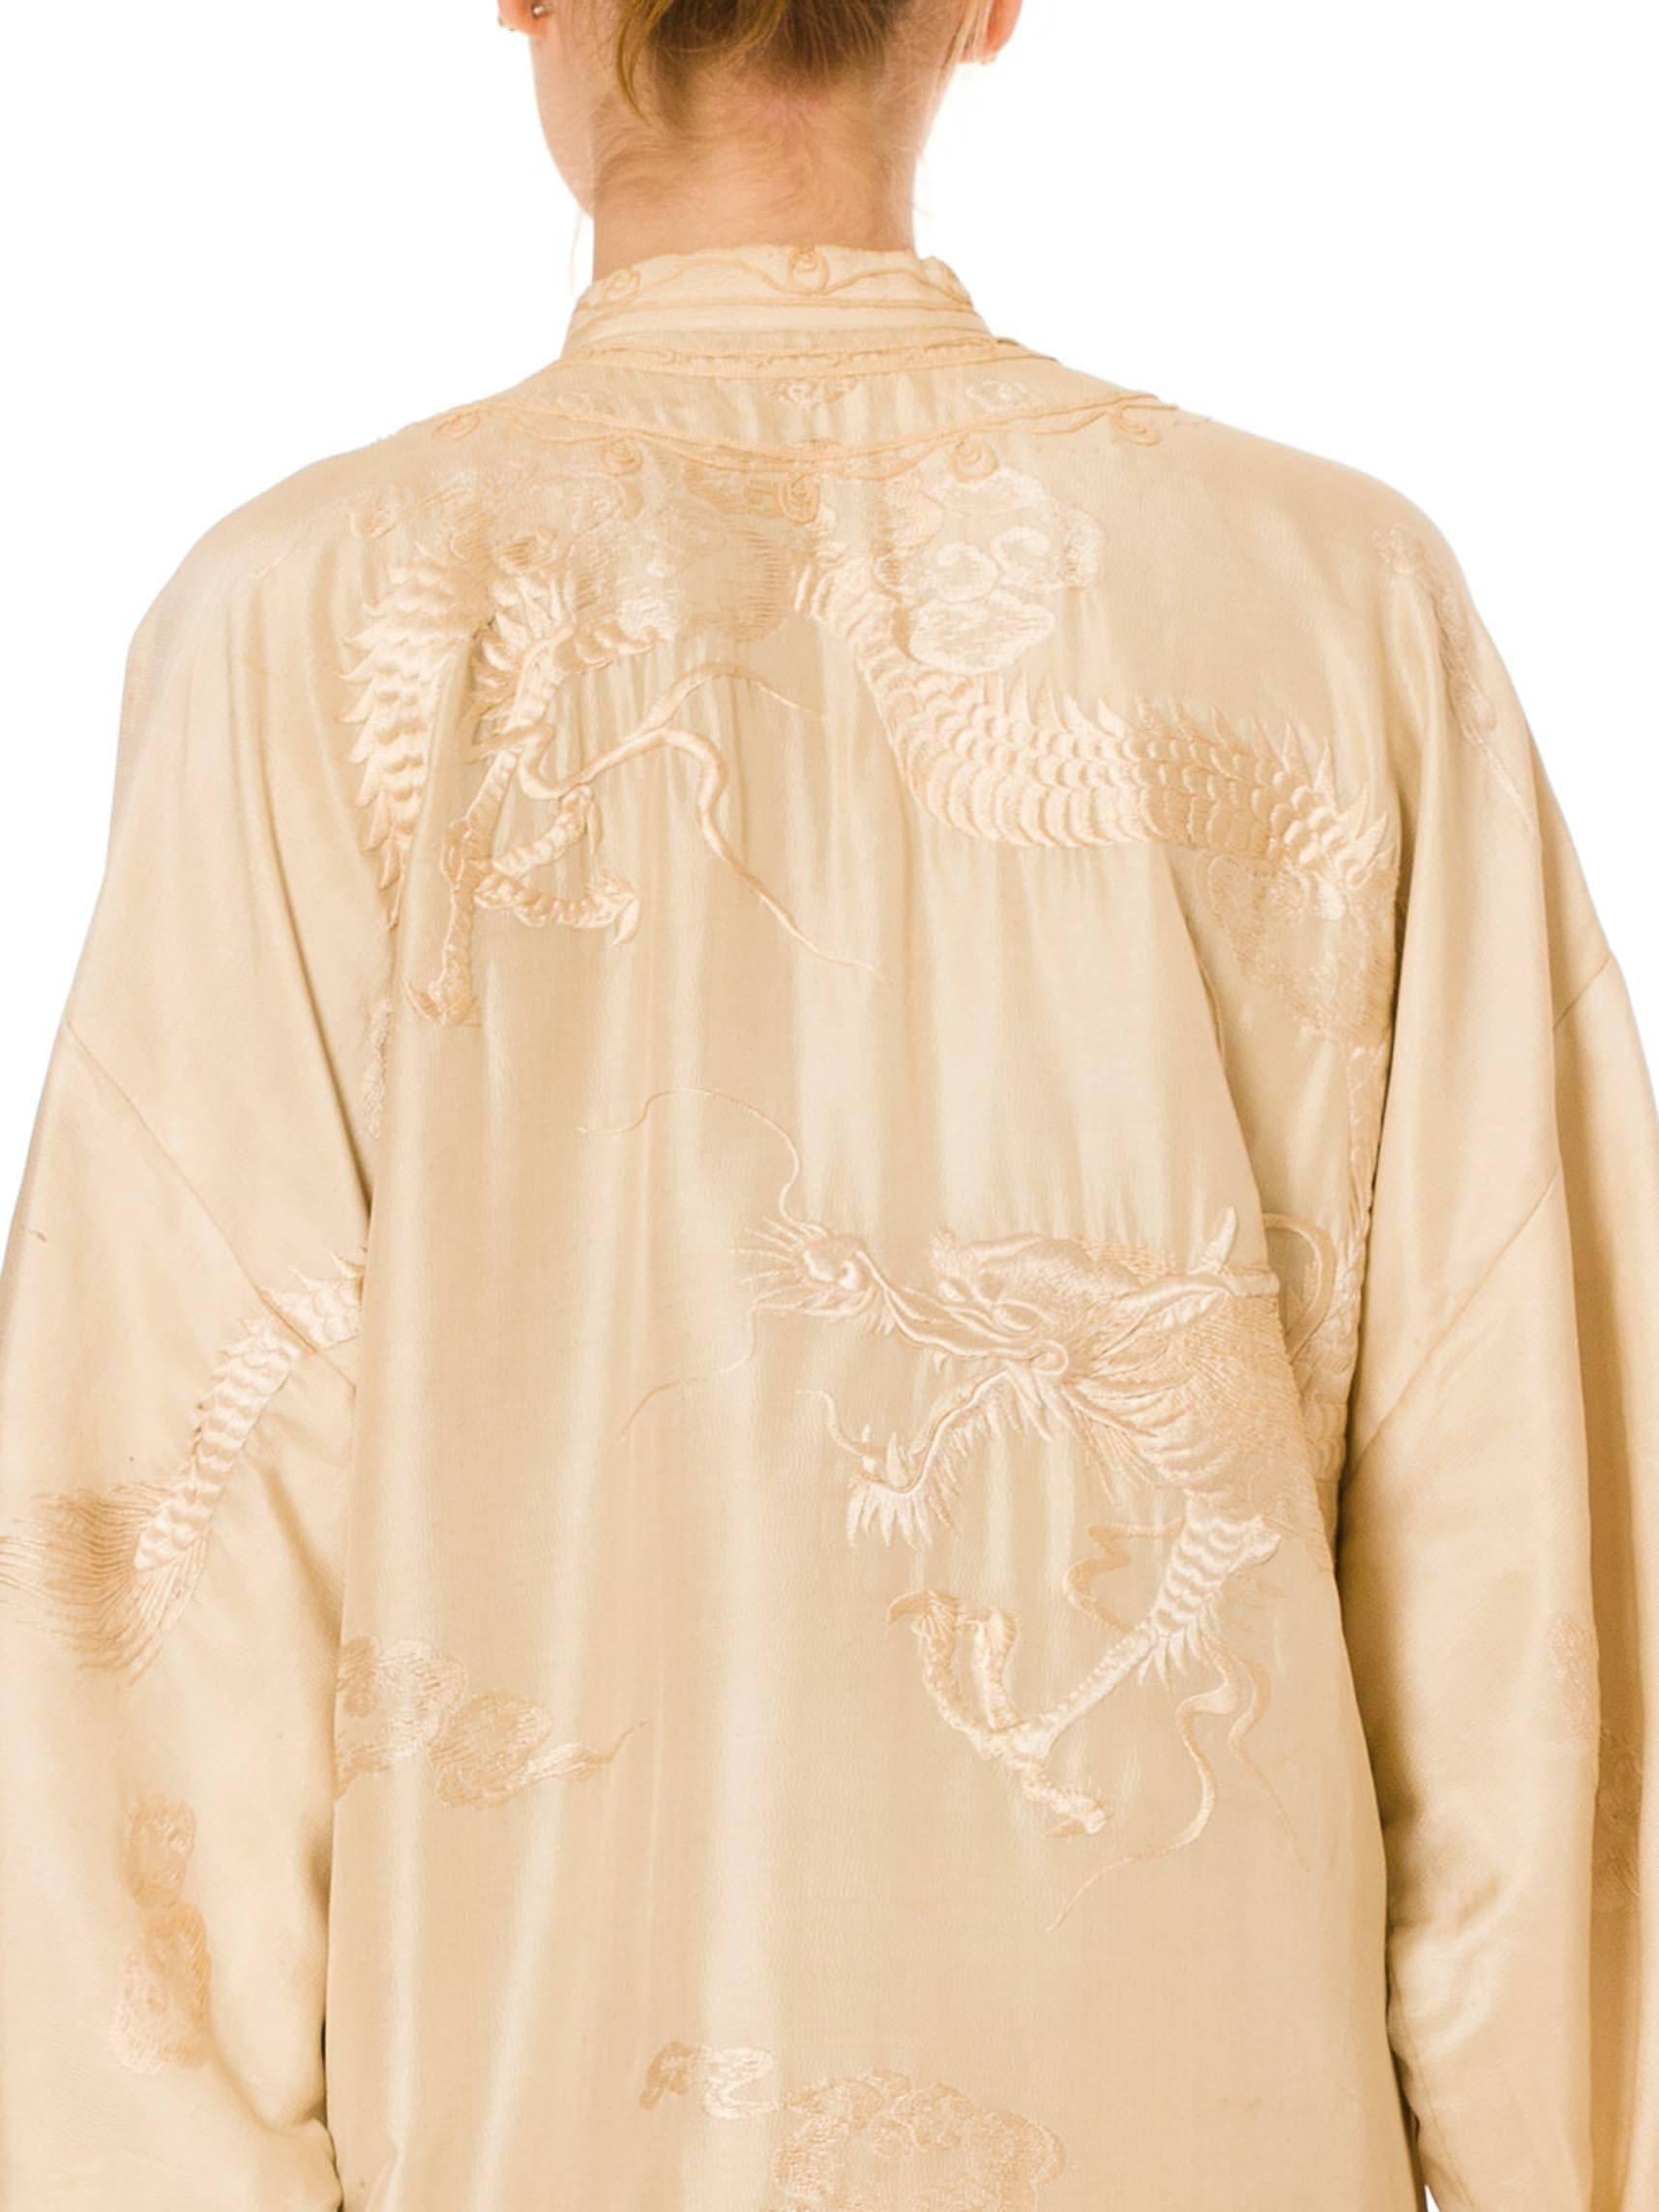 Antique Chinese Jacket Embroidered with a White Dragon 3